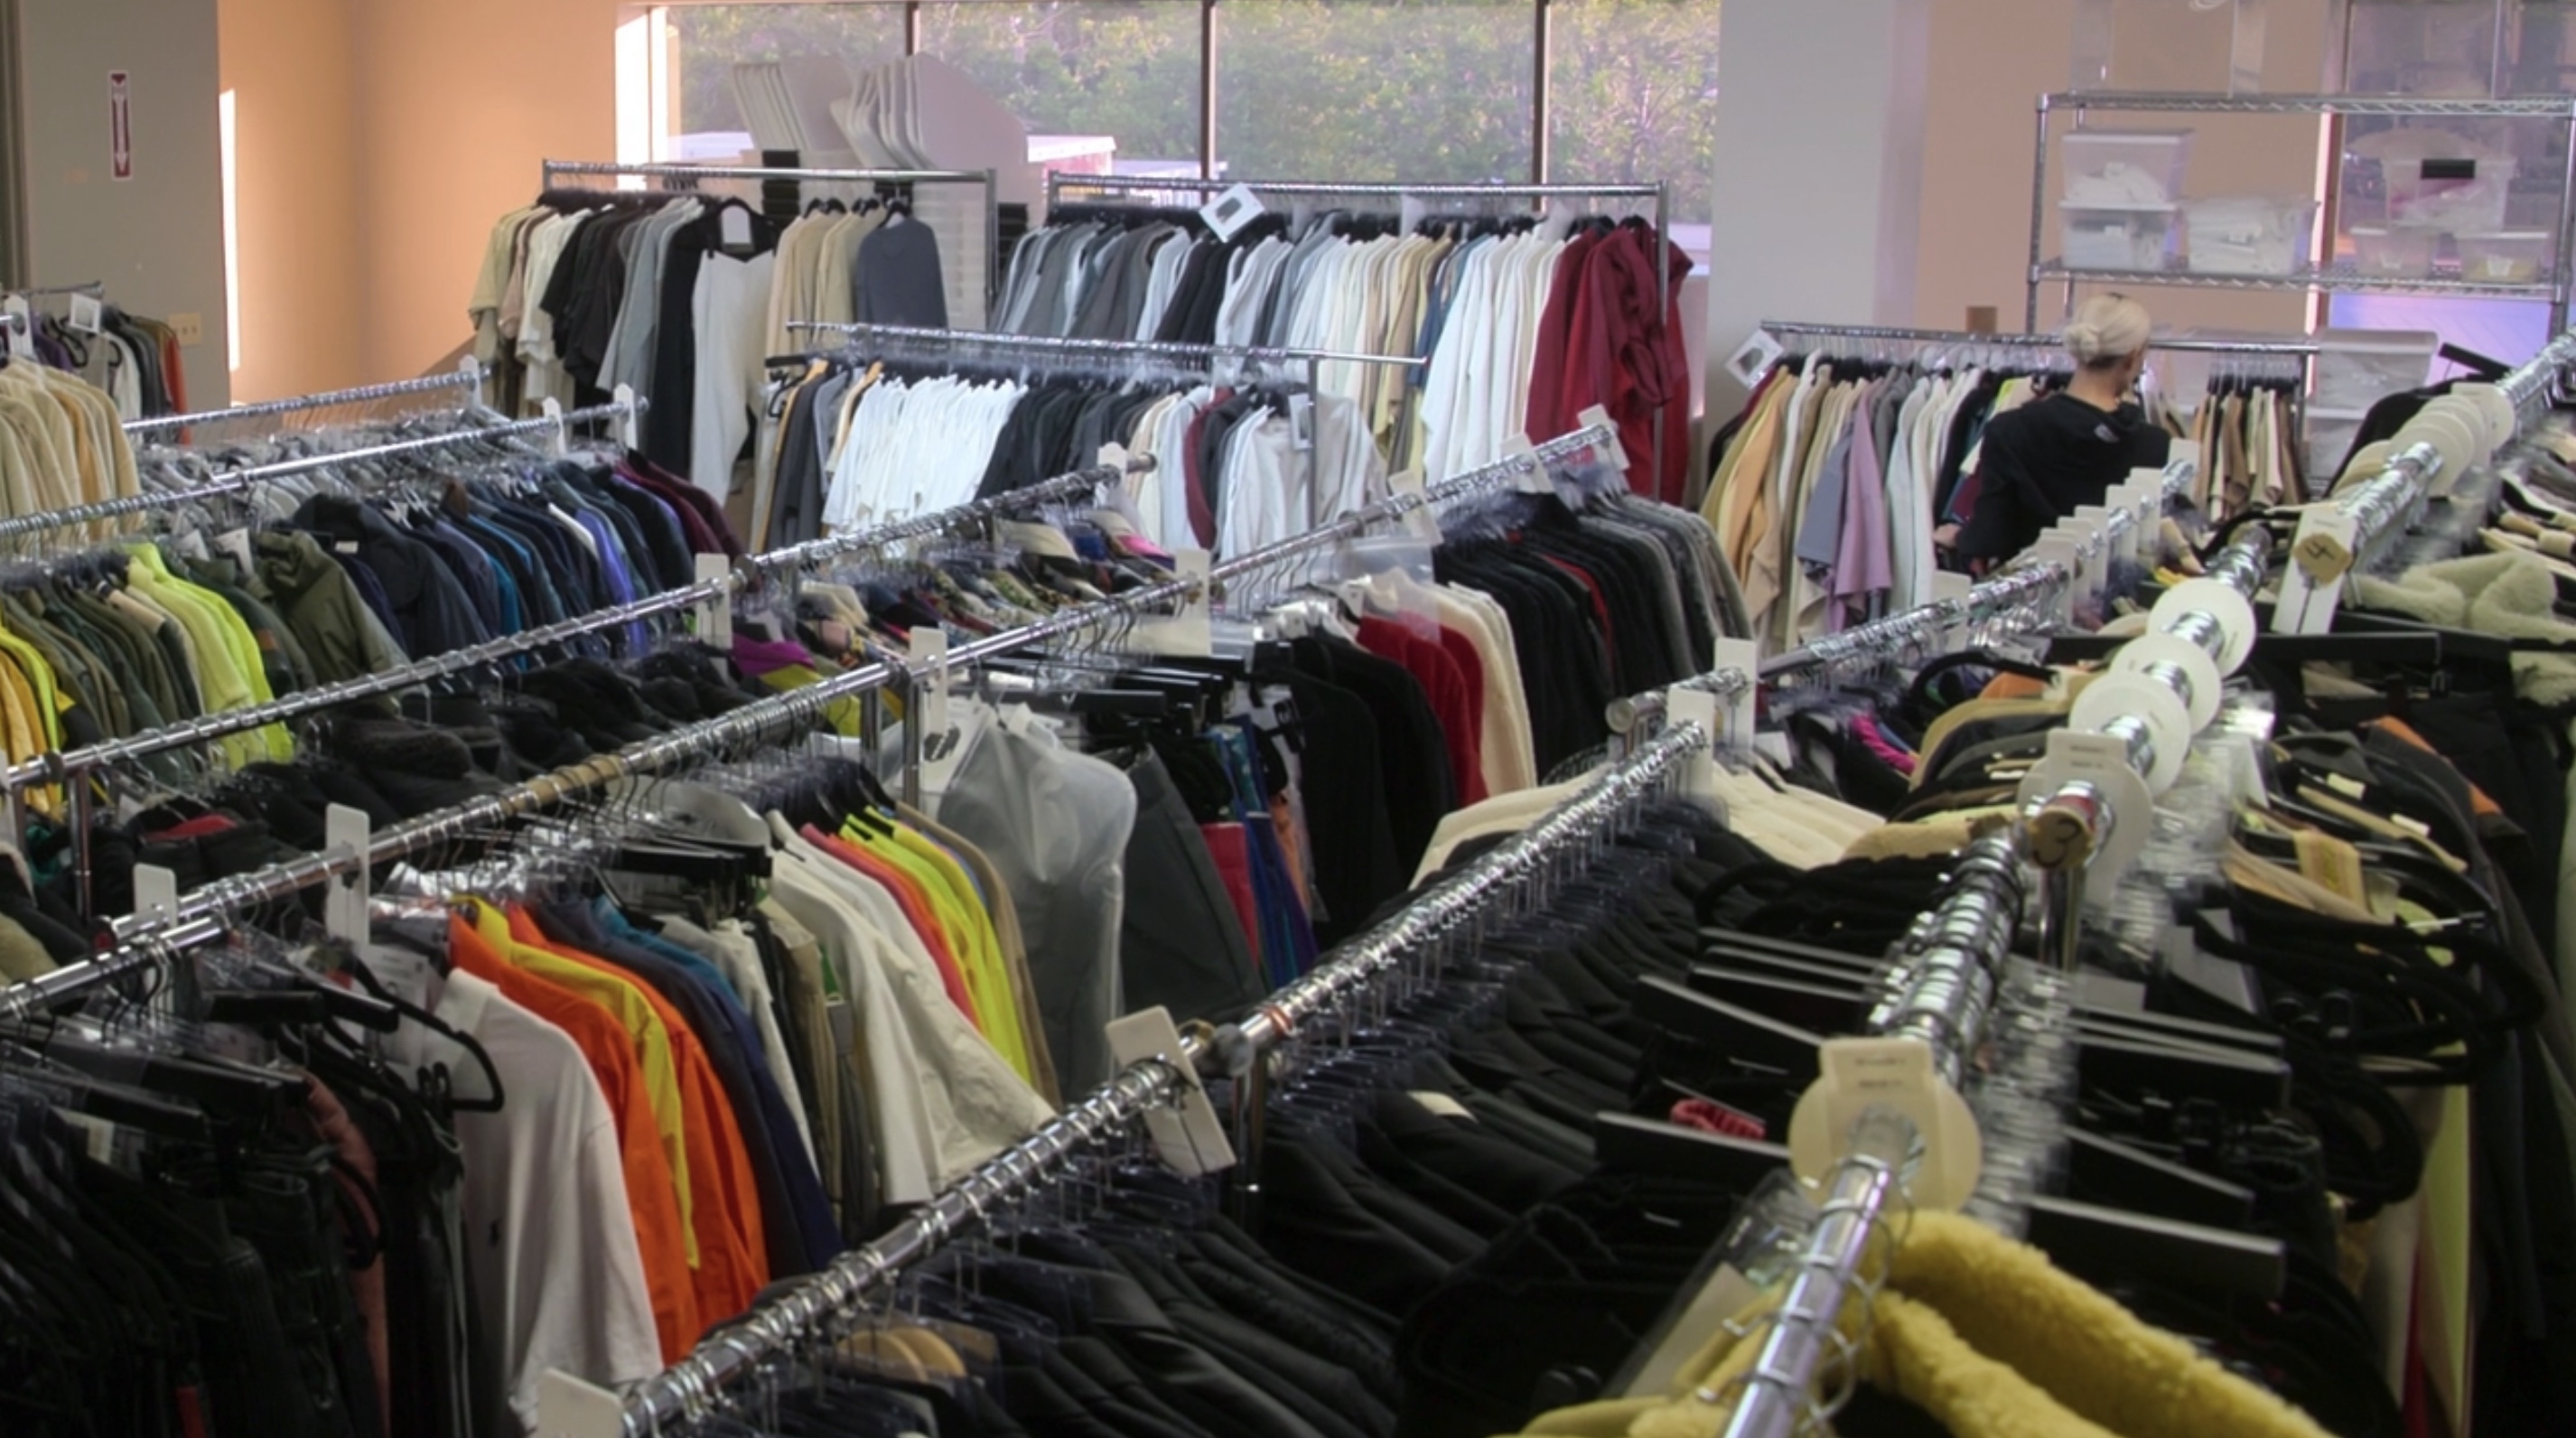 The racks of clothing